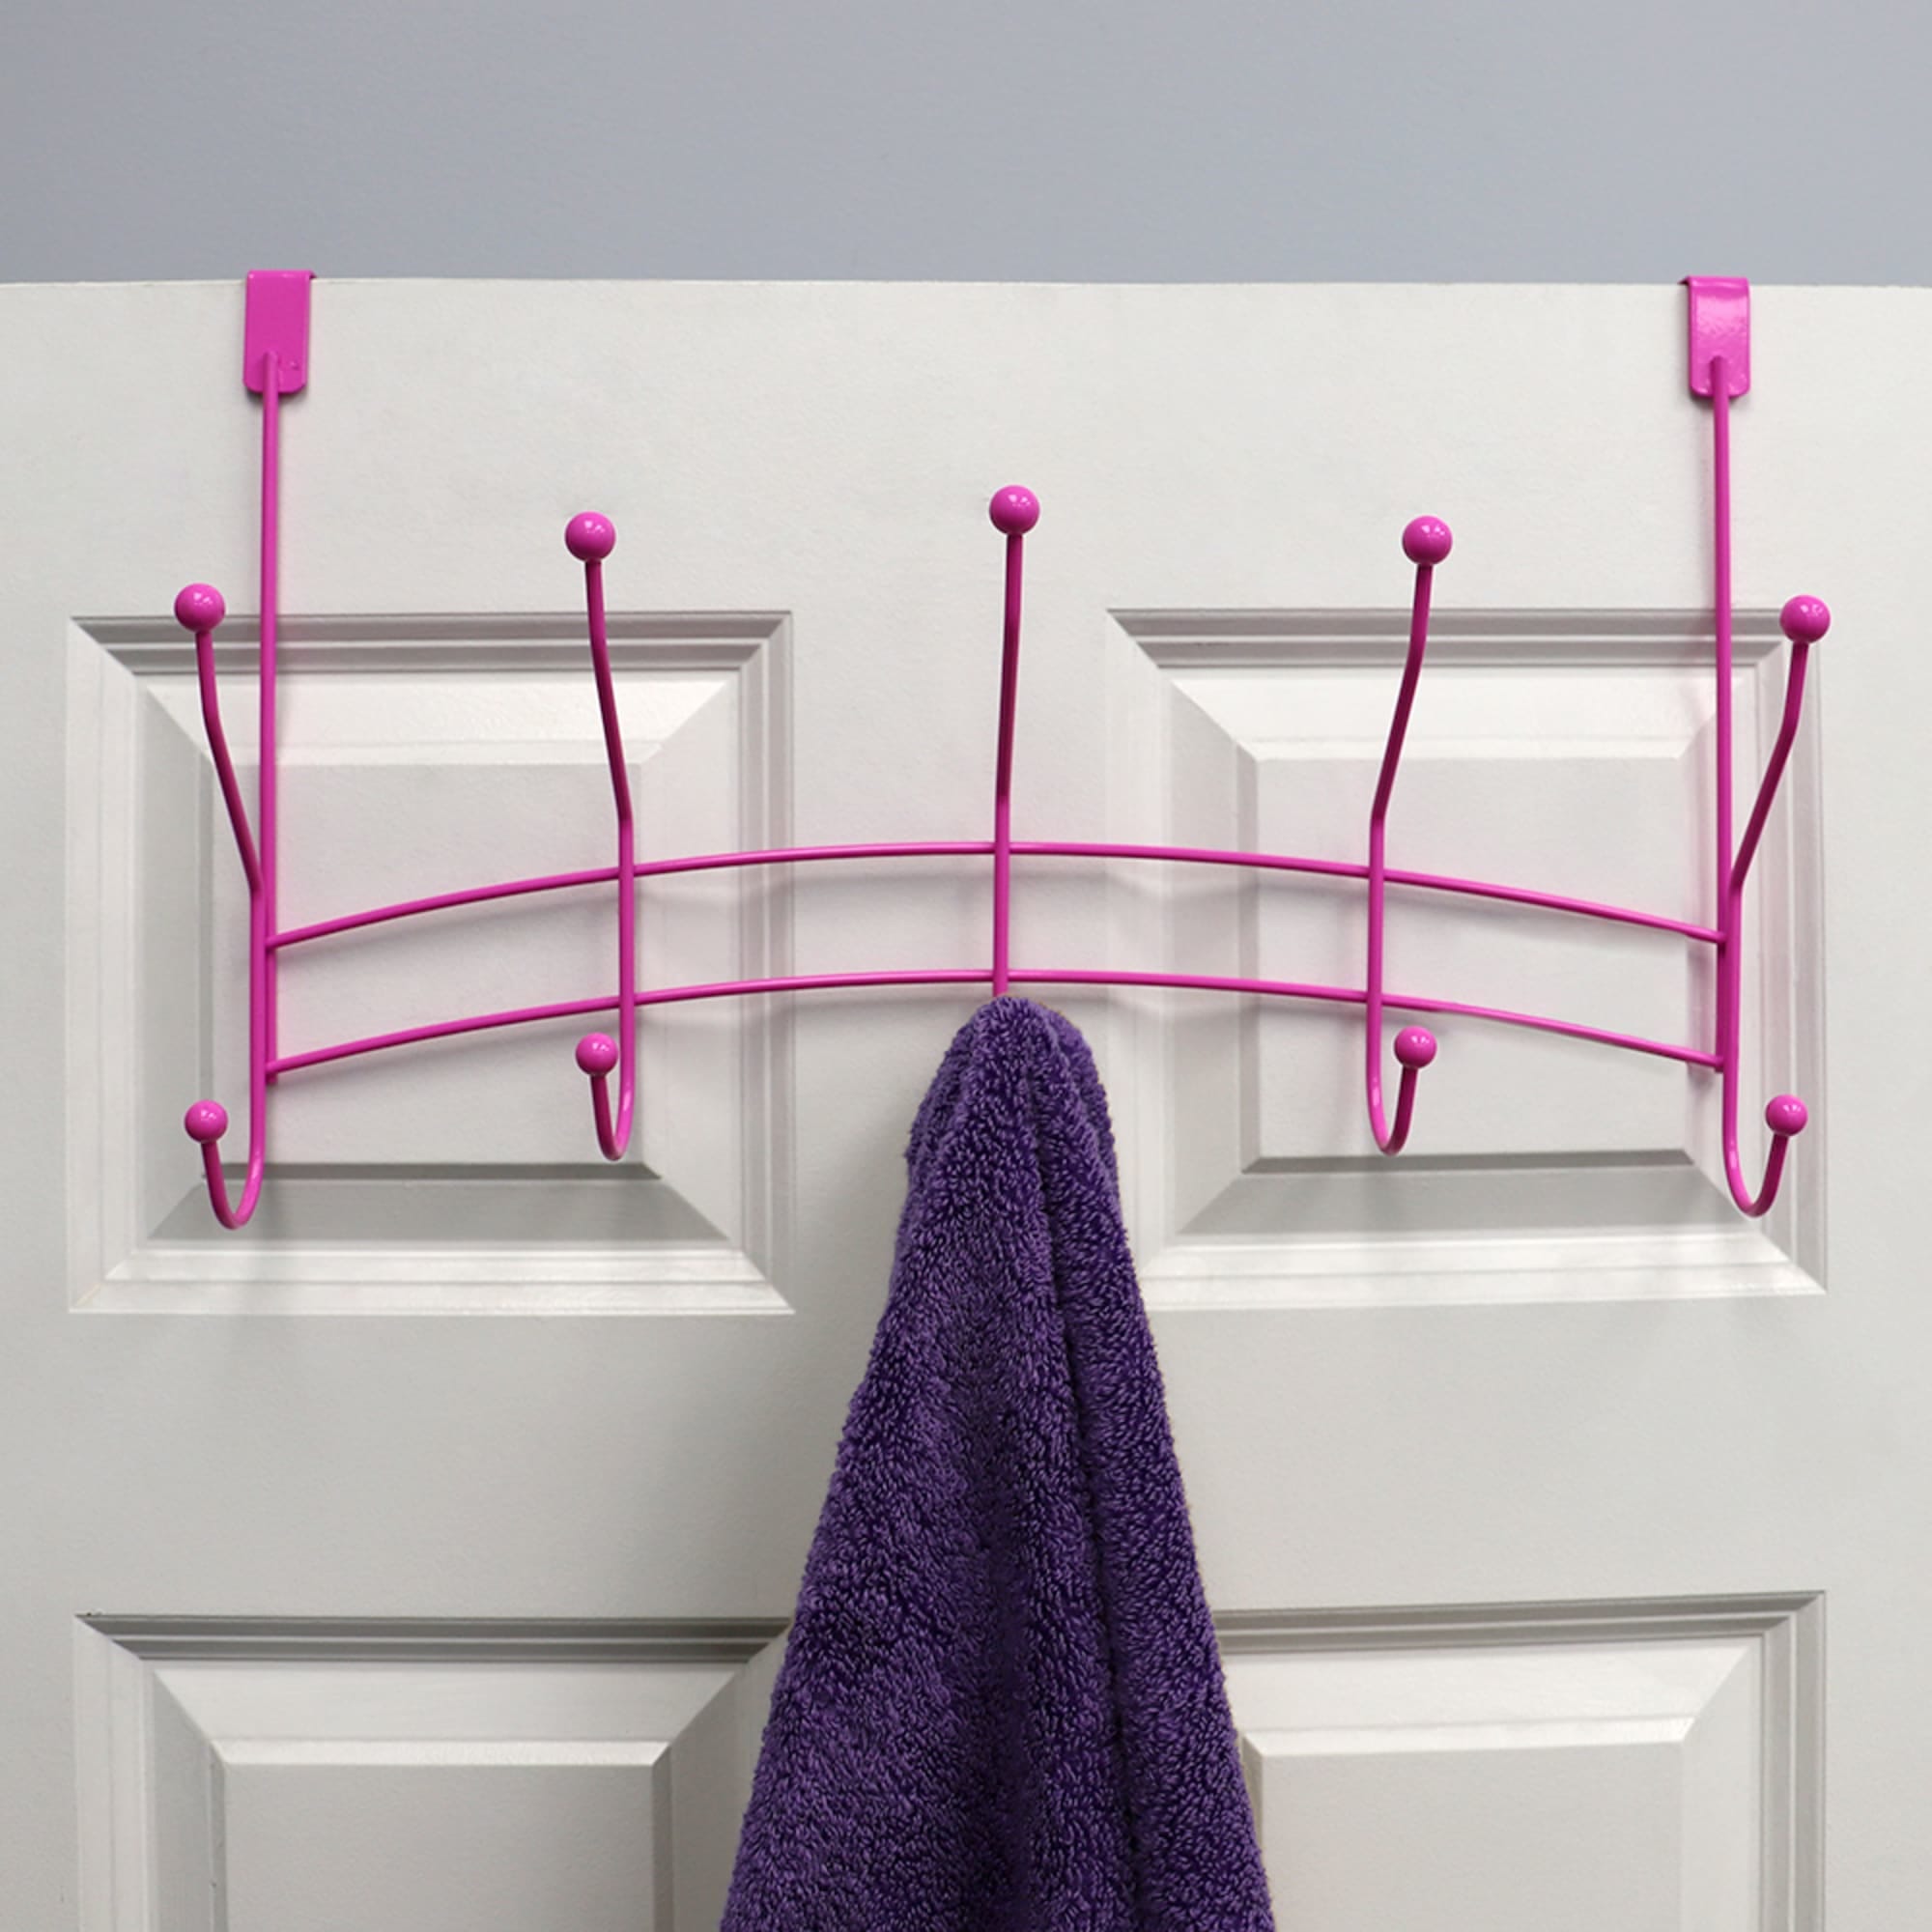 Home Basics Shelby 5 Double Tiered Hook Over the Door Hanging Rack, Pink $6.00 EACH, CASE PACK OF 12